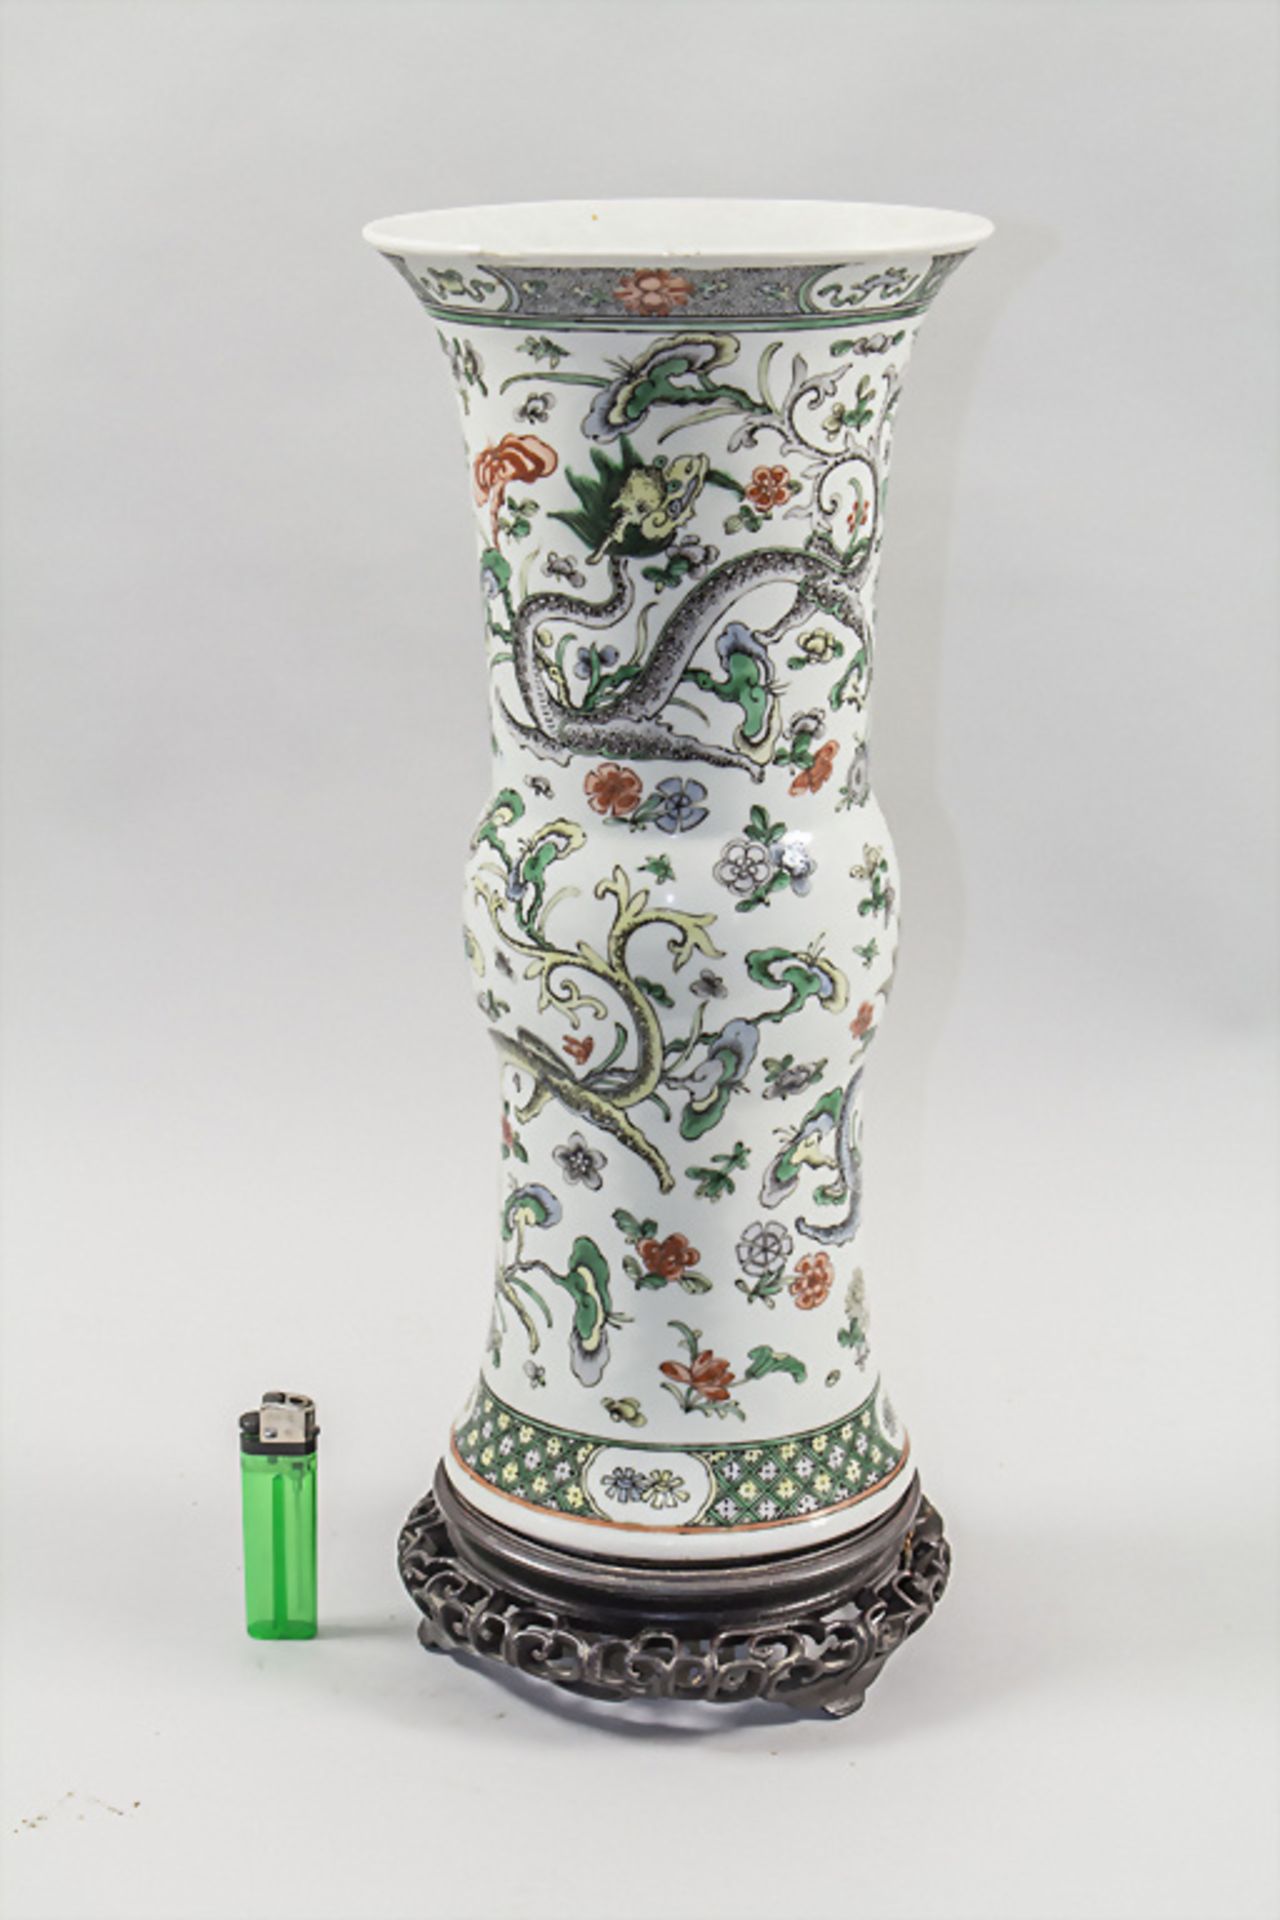 Vase mit Holzstand / A vase with wooden stand, China, Qing-Dynastie (1644-1911), 18./19. Jh. - Image 2 of 7